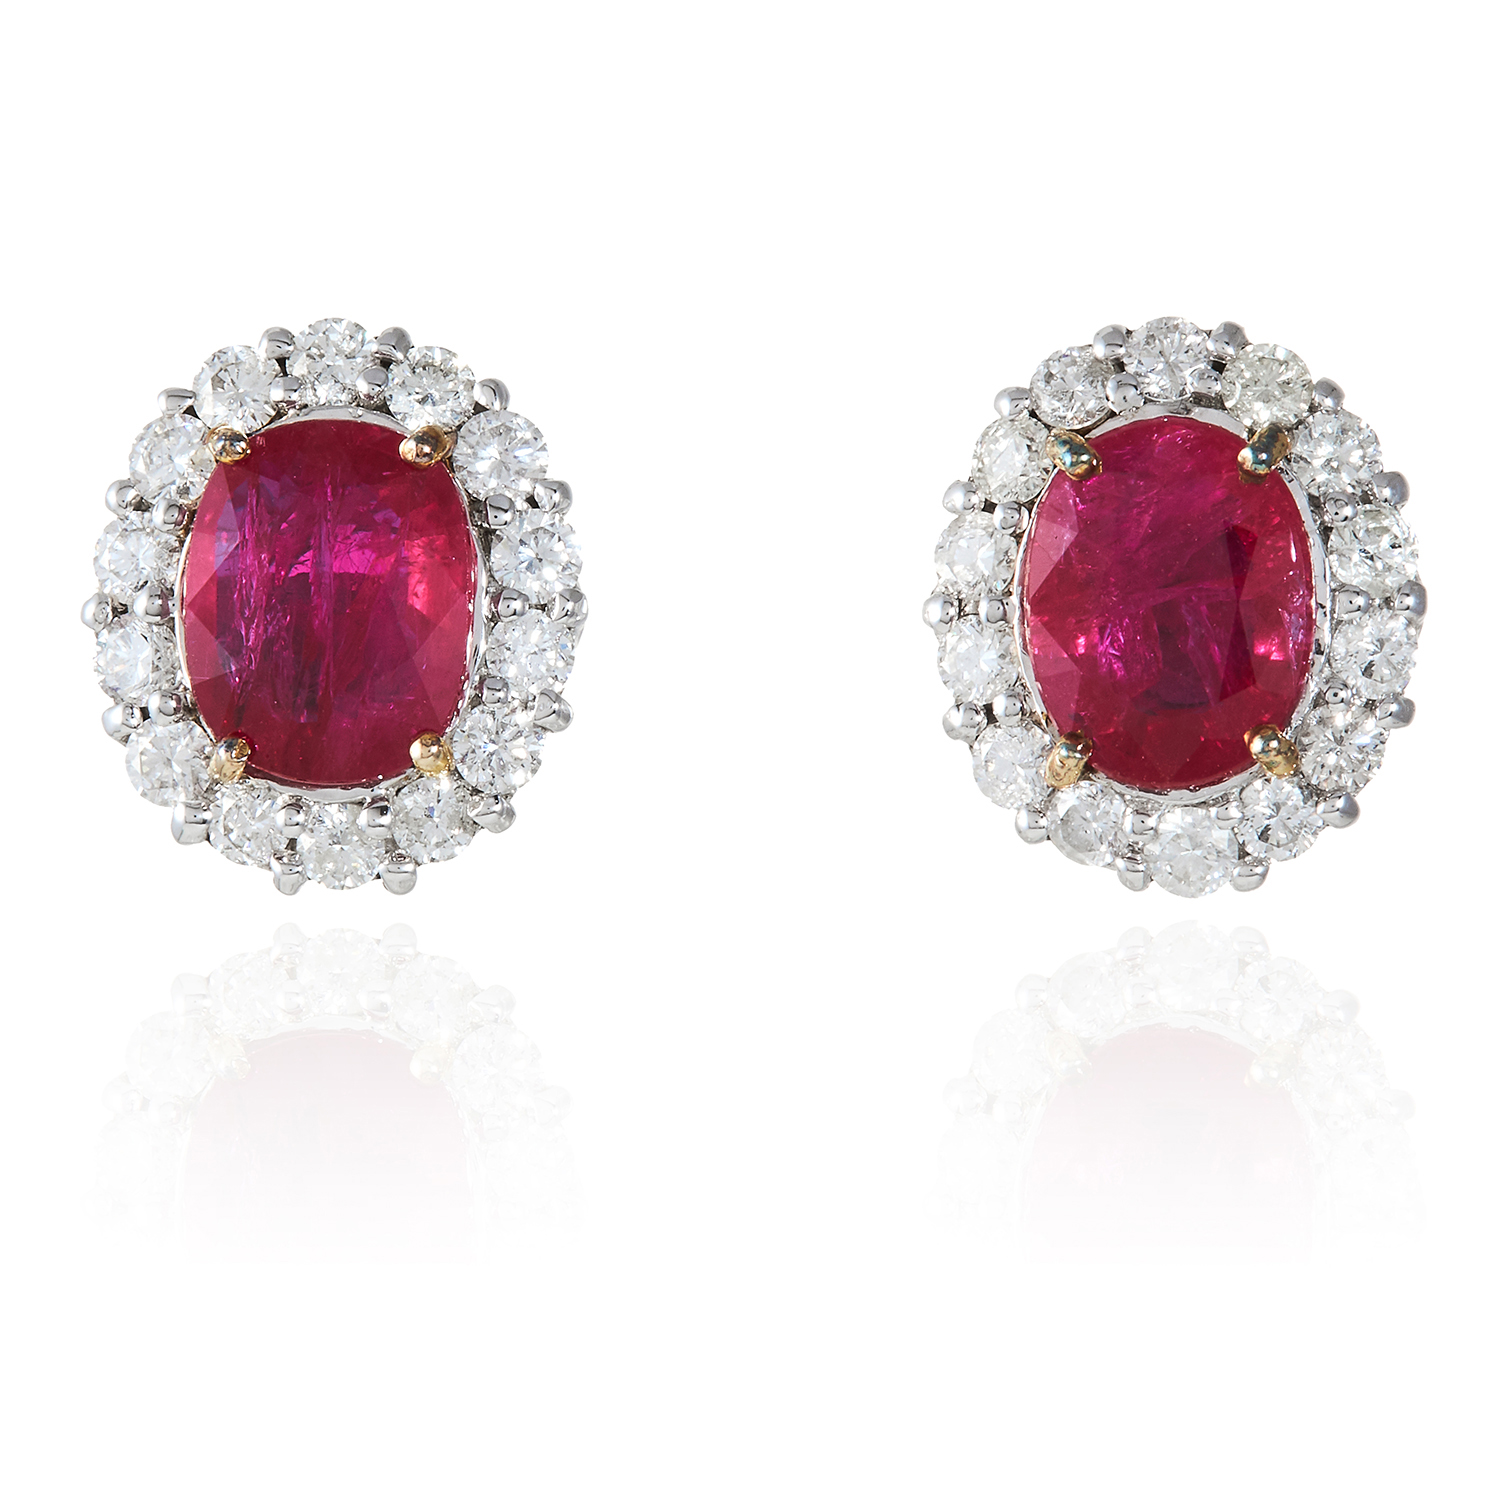 A PAIR OF RUBY AND DIAMOND CLUSTER EARRINGS in 18ct white gold, each set with an oval cut ruby